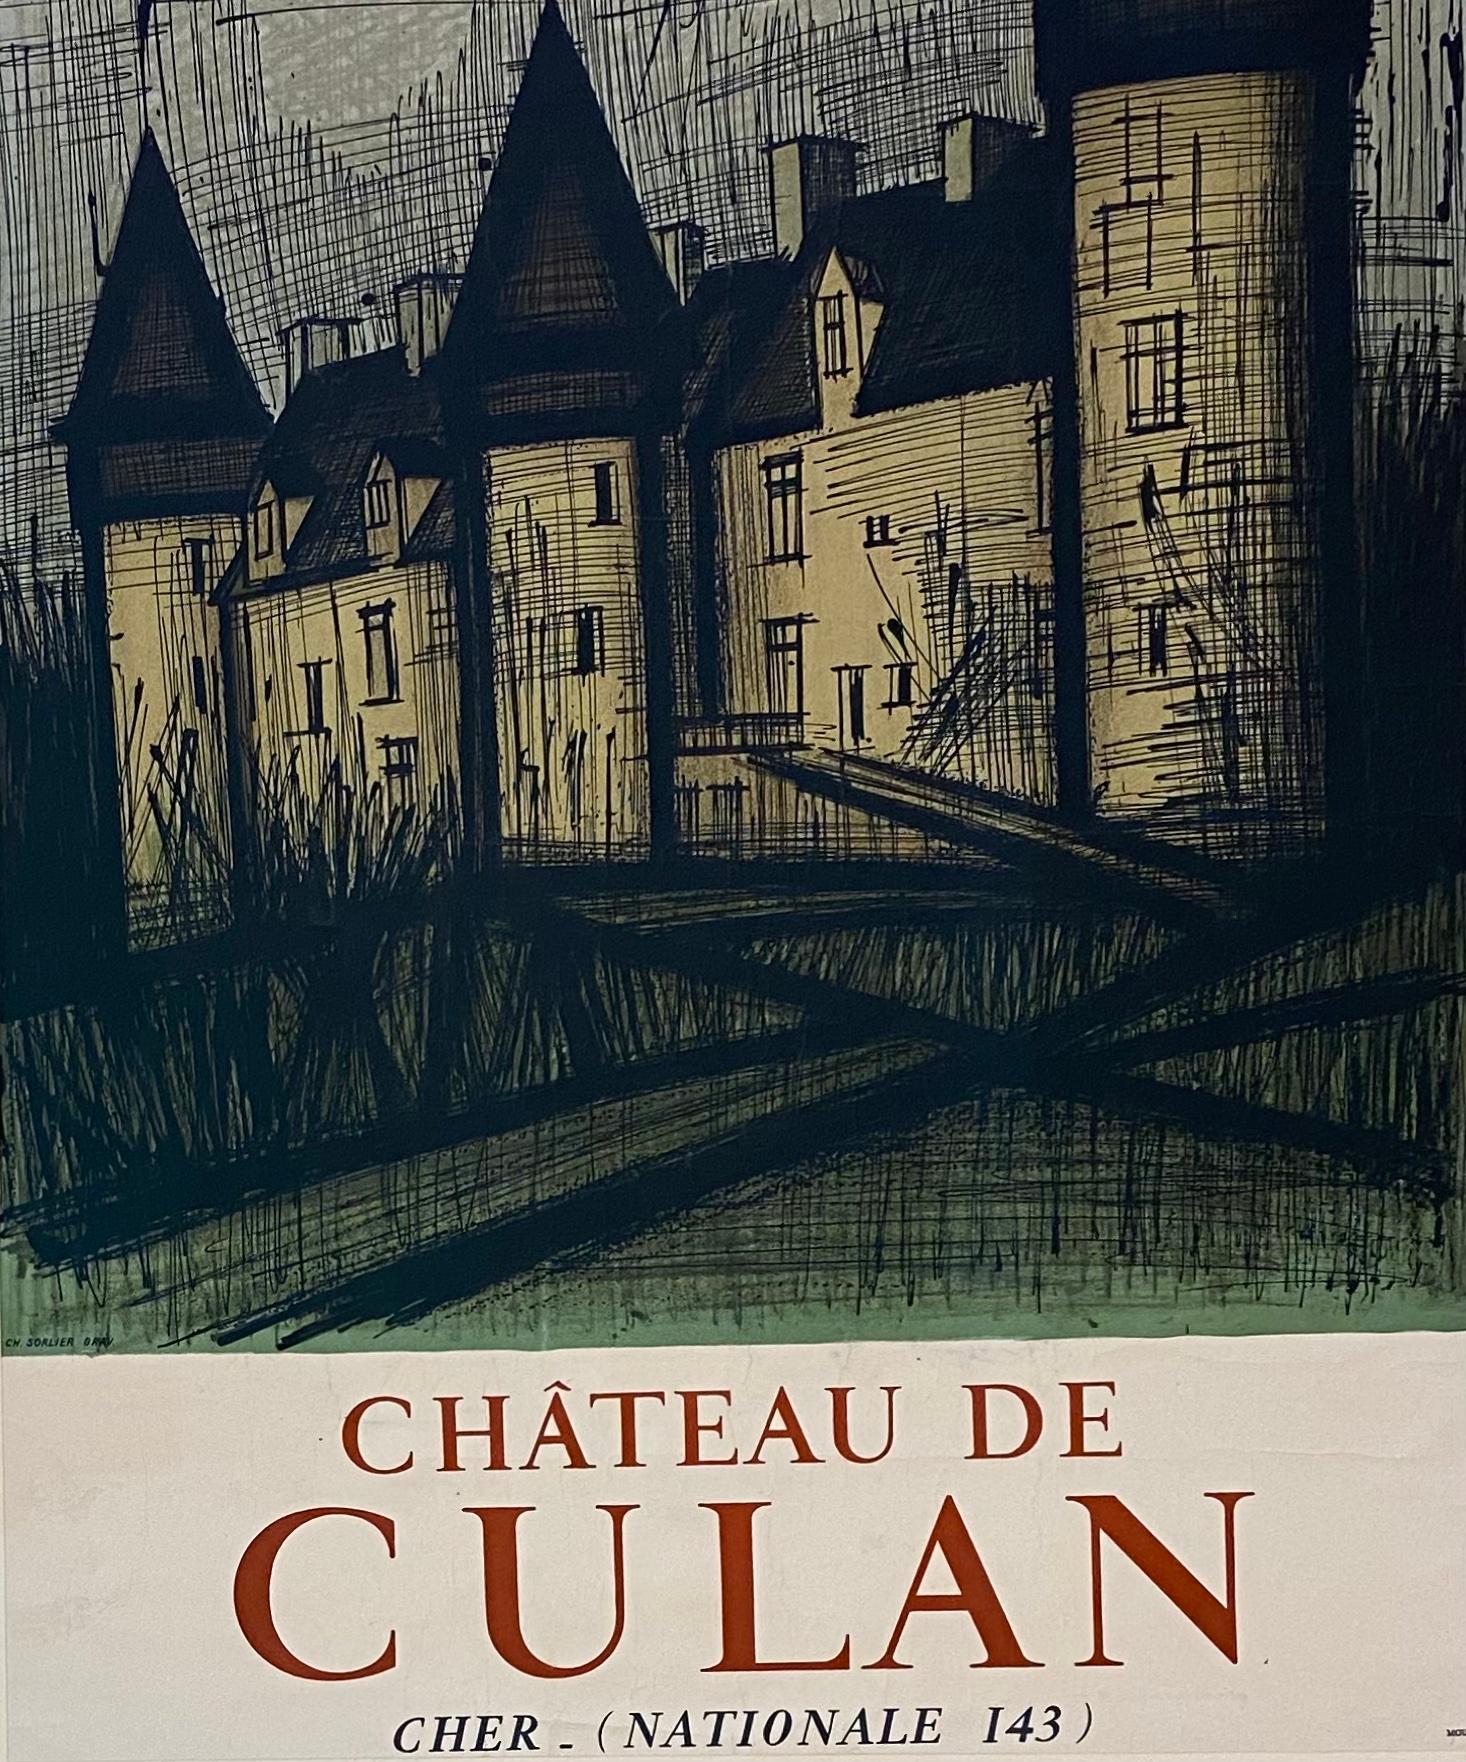 A vintage Bernard Buffet art poster printed by Mourlot. Personalized to a friend and hand signed by the artist in the upper right under his name printed on this original poster. Features the Chateau du Culan. 

Presented in a beautiful gilt wood